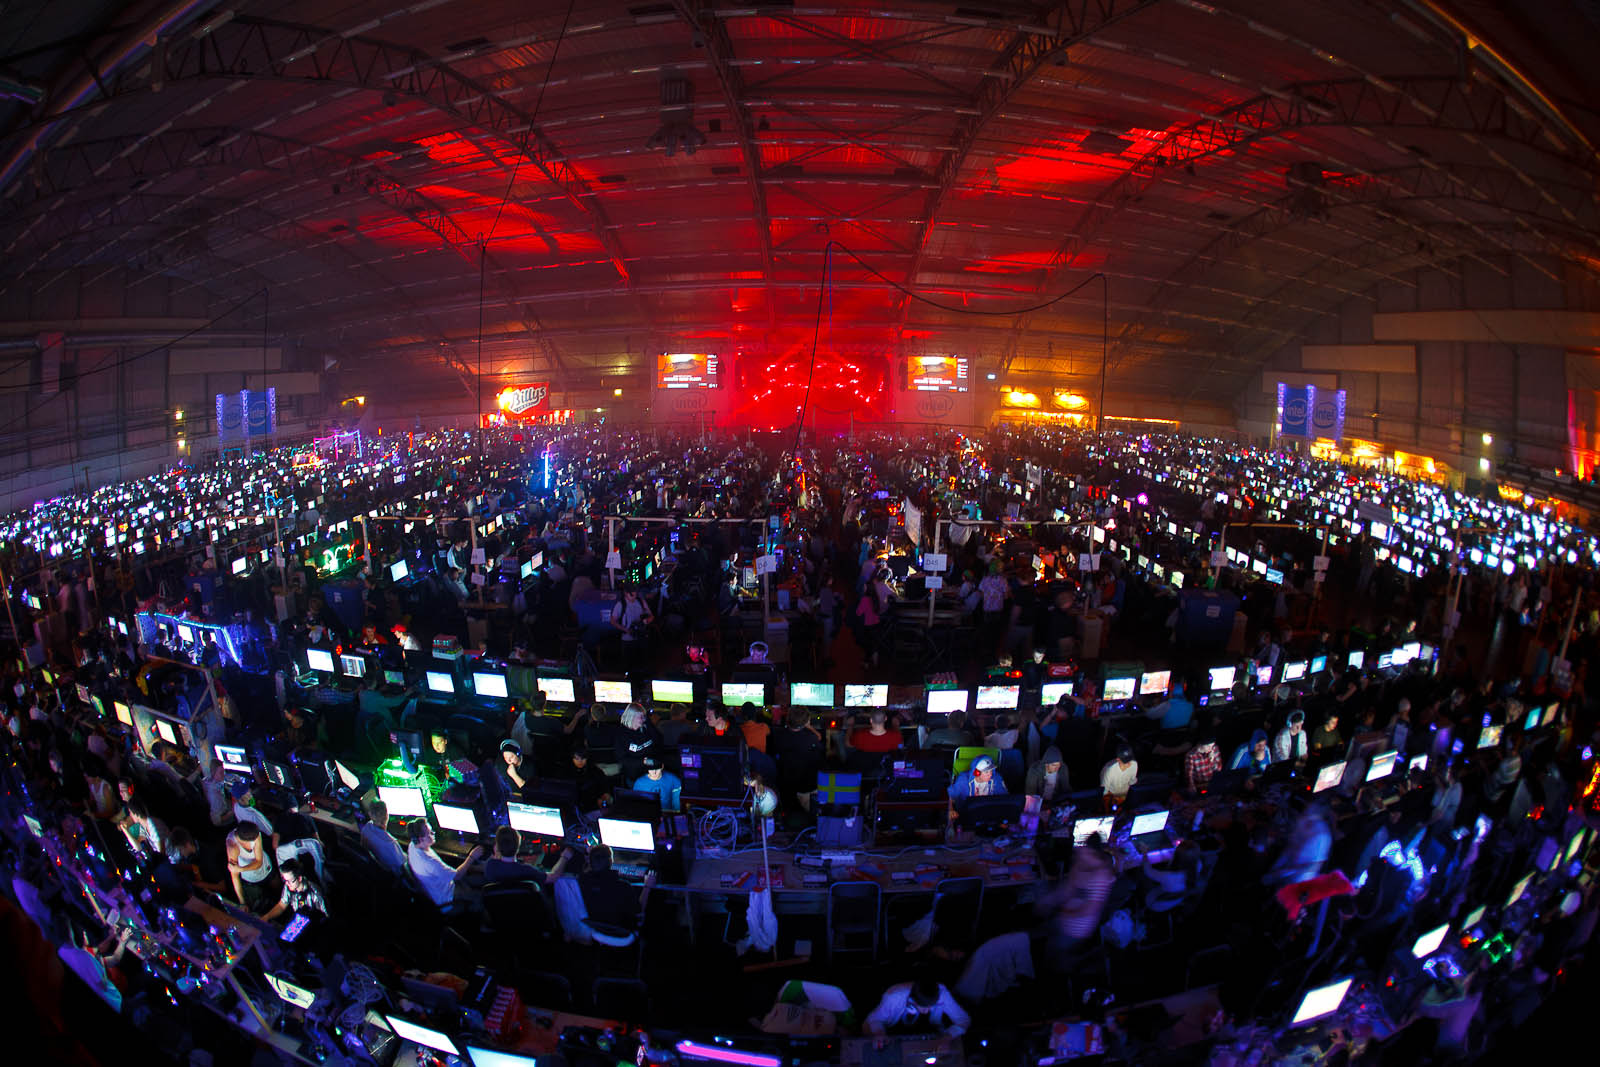 Welcome introduction to DreamHack Winter 2011